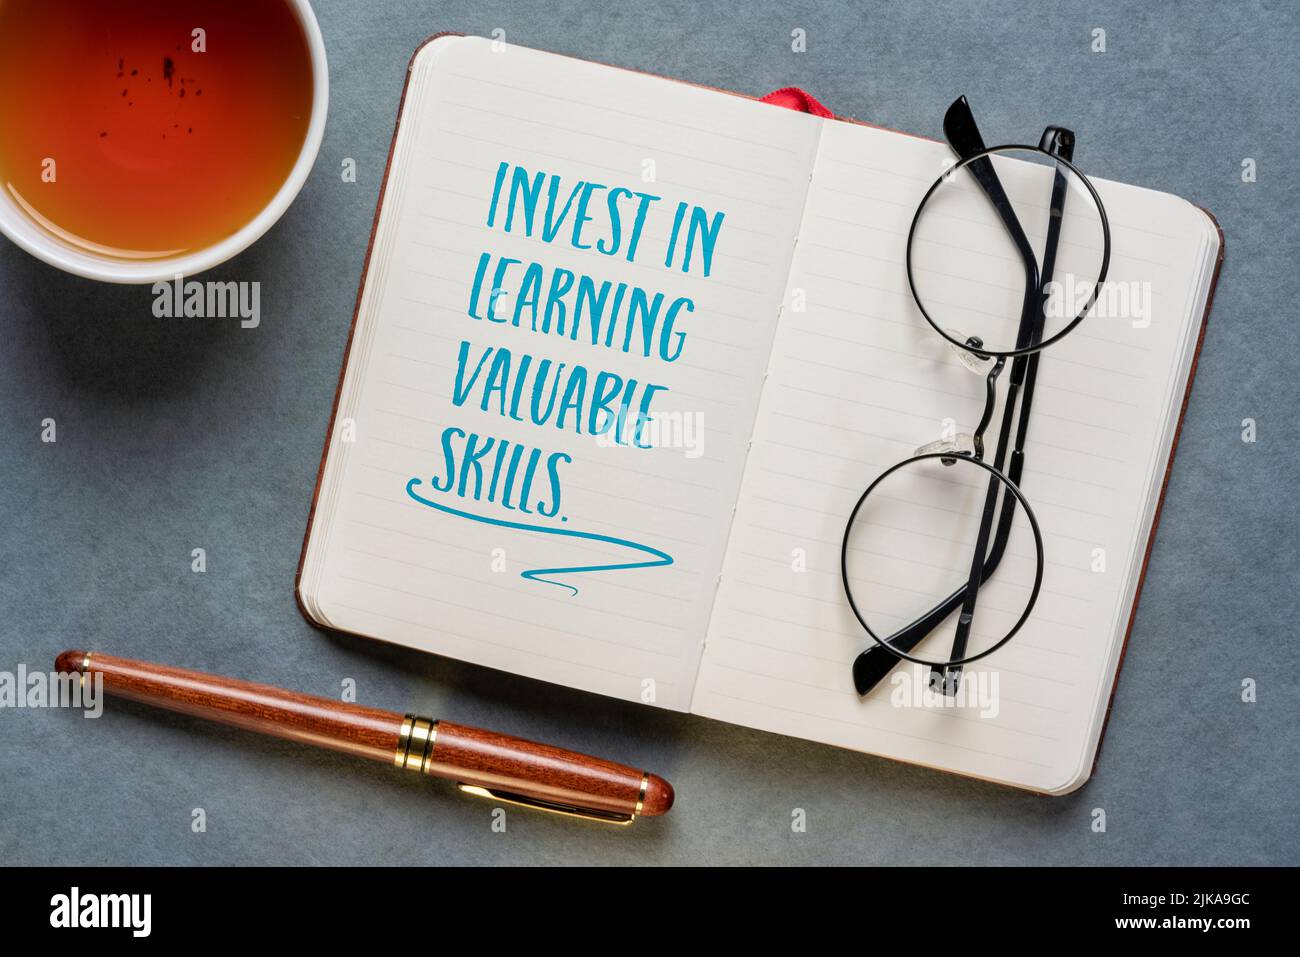 invest in learning valuable skills - inspirational advice, writing in a notebook, flat lay with tea, education and personal development concept Stock Photo